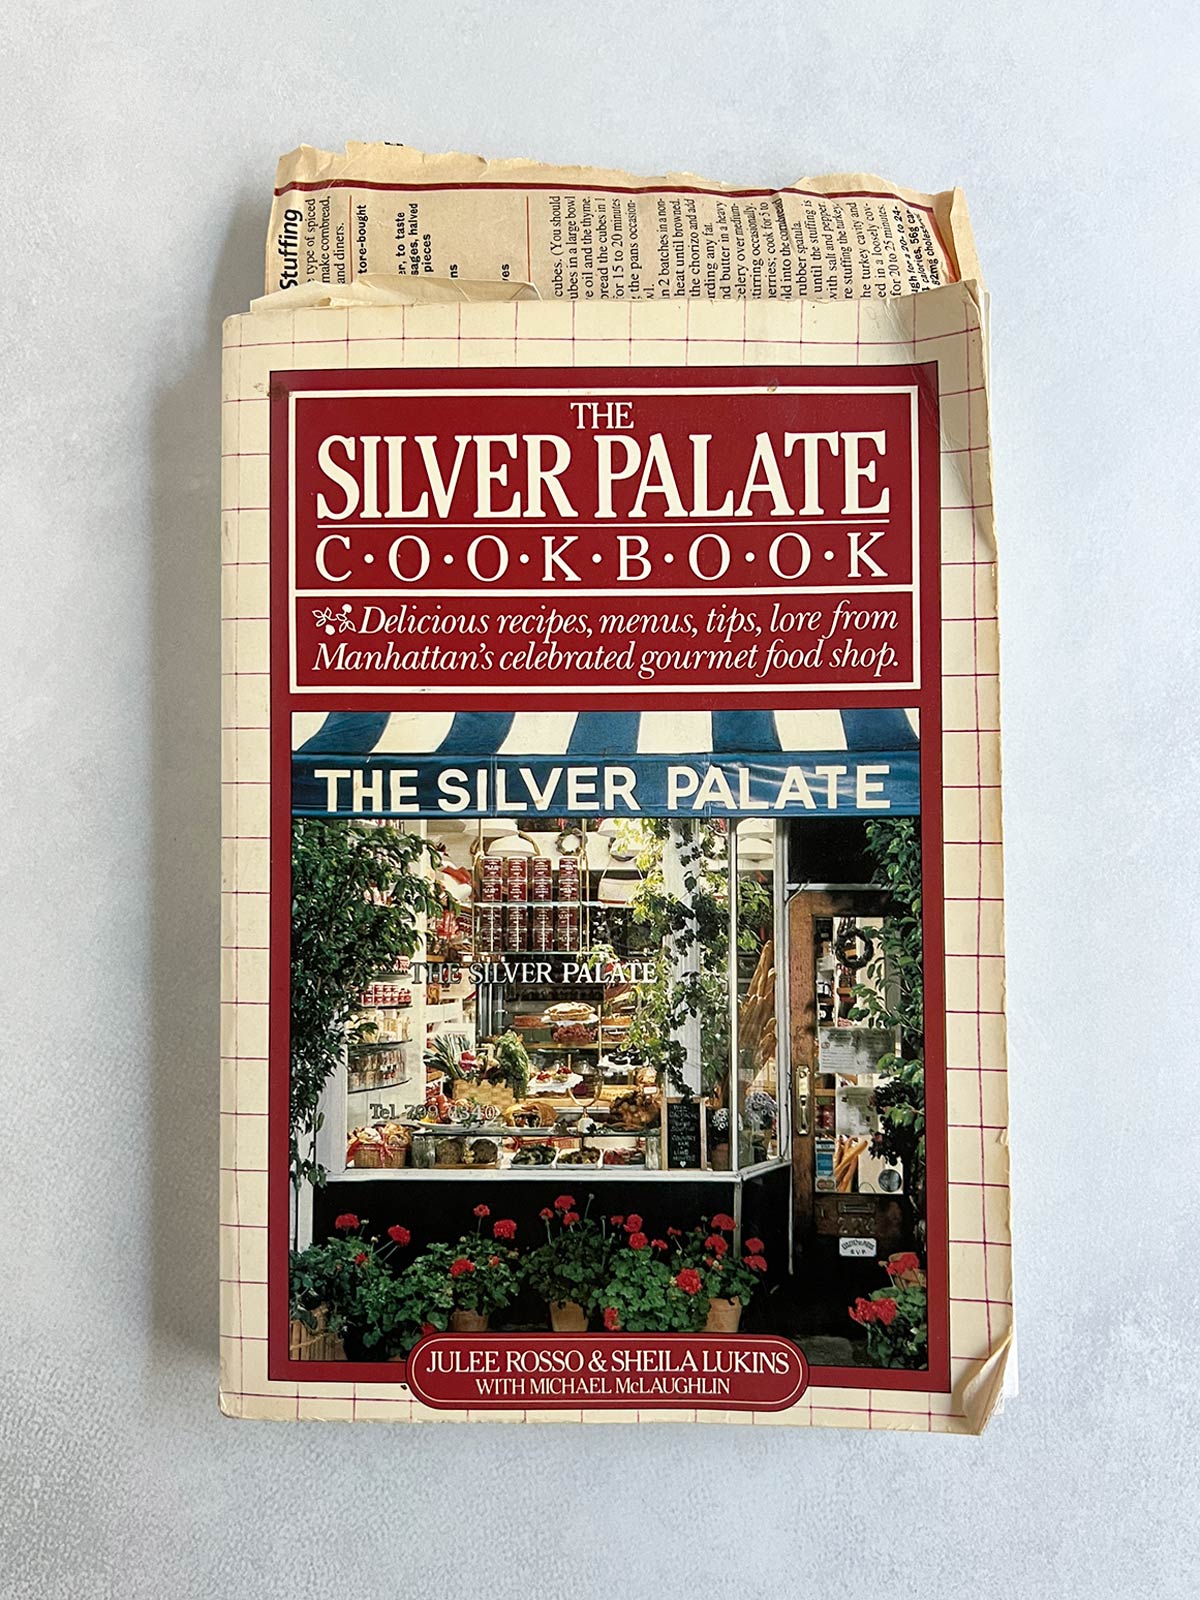 Silver Palate cookbook with miscellaneous papers sticking out of it.